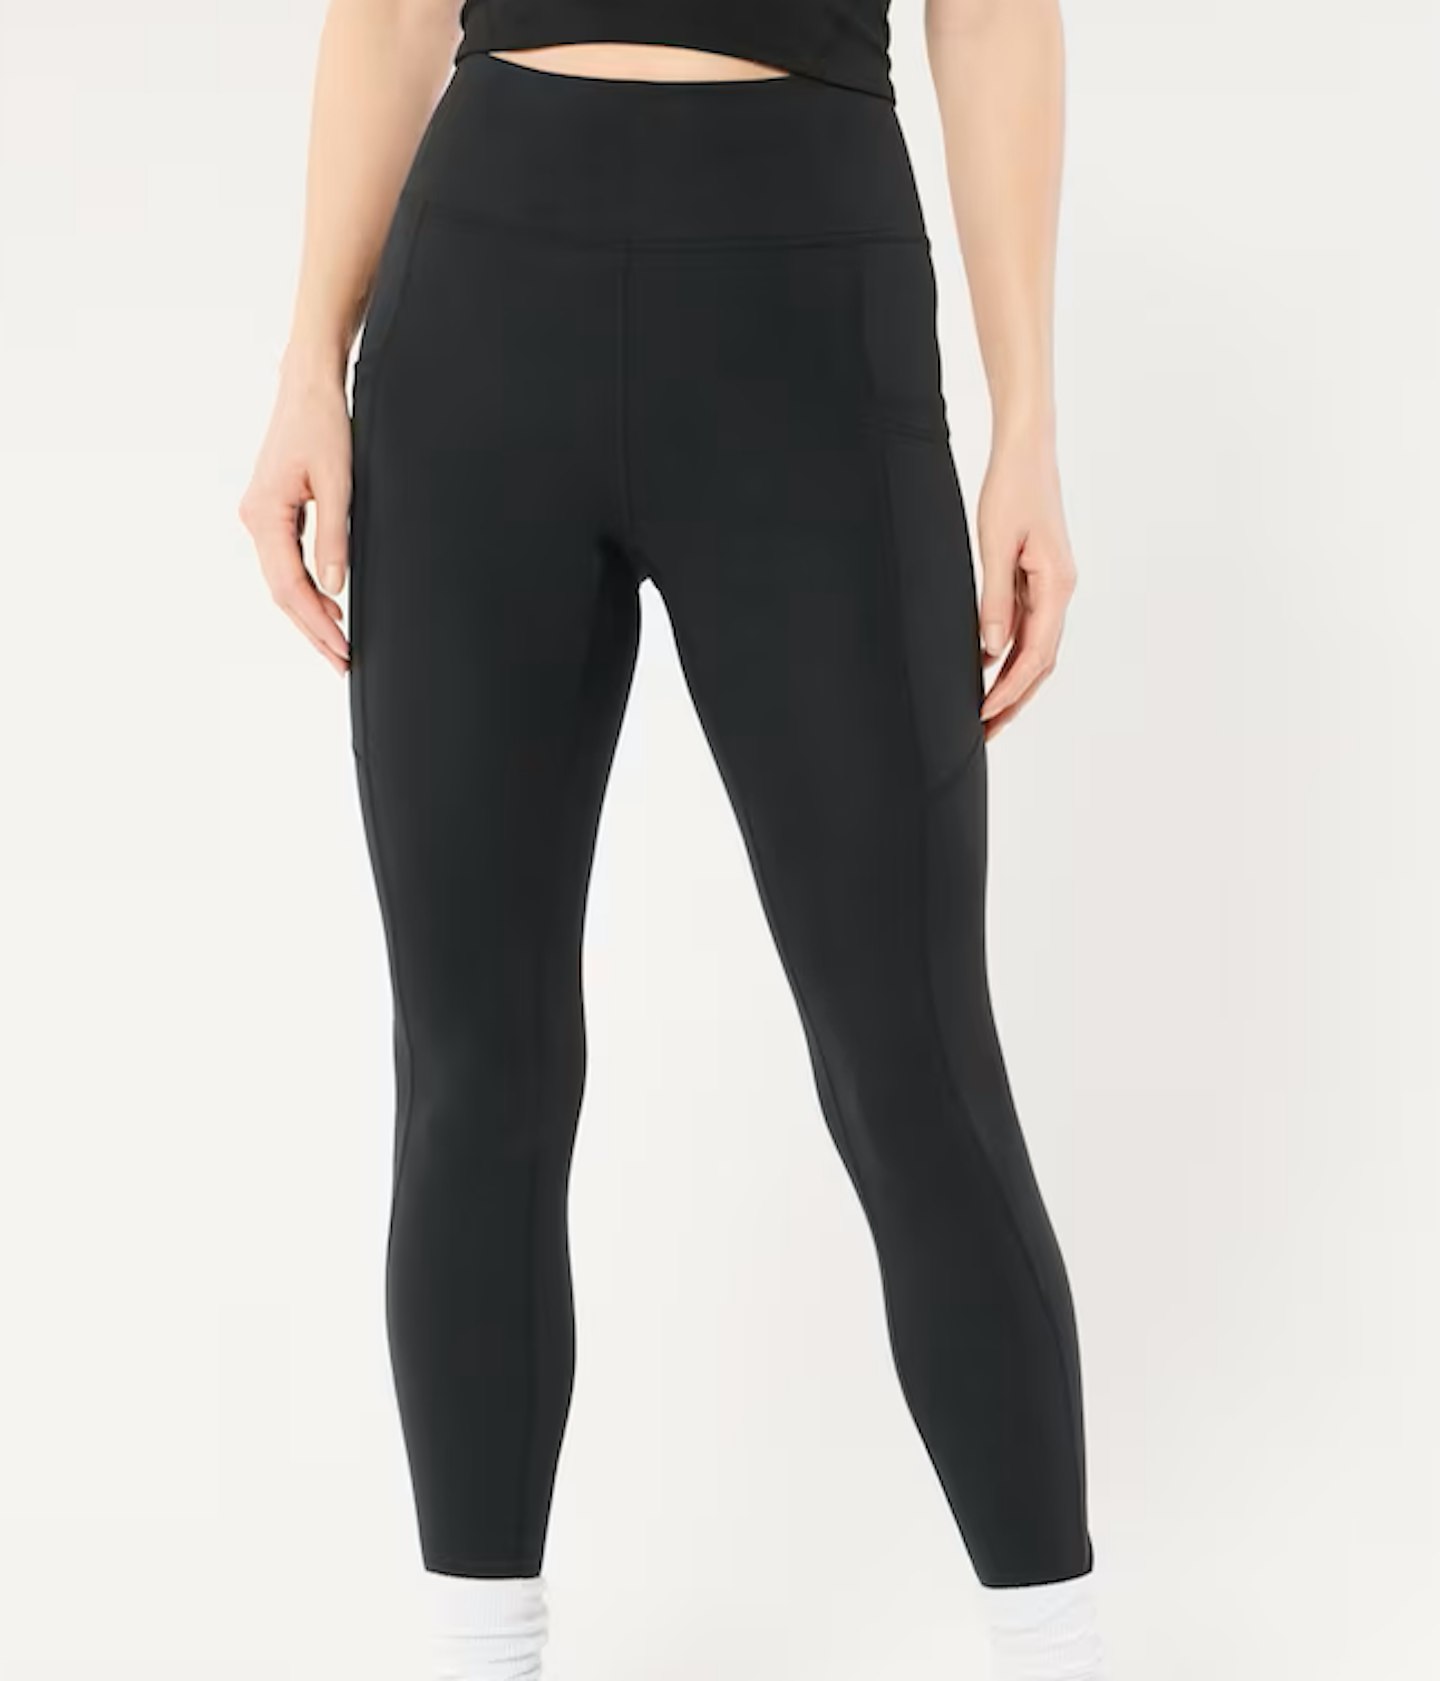 The Best Gym Leggings With Pockets For All Your Necessities